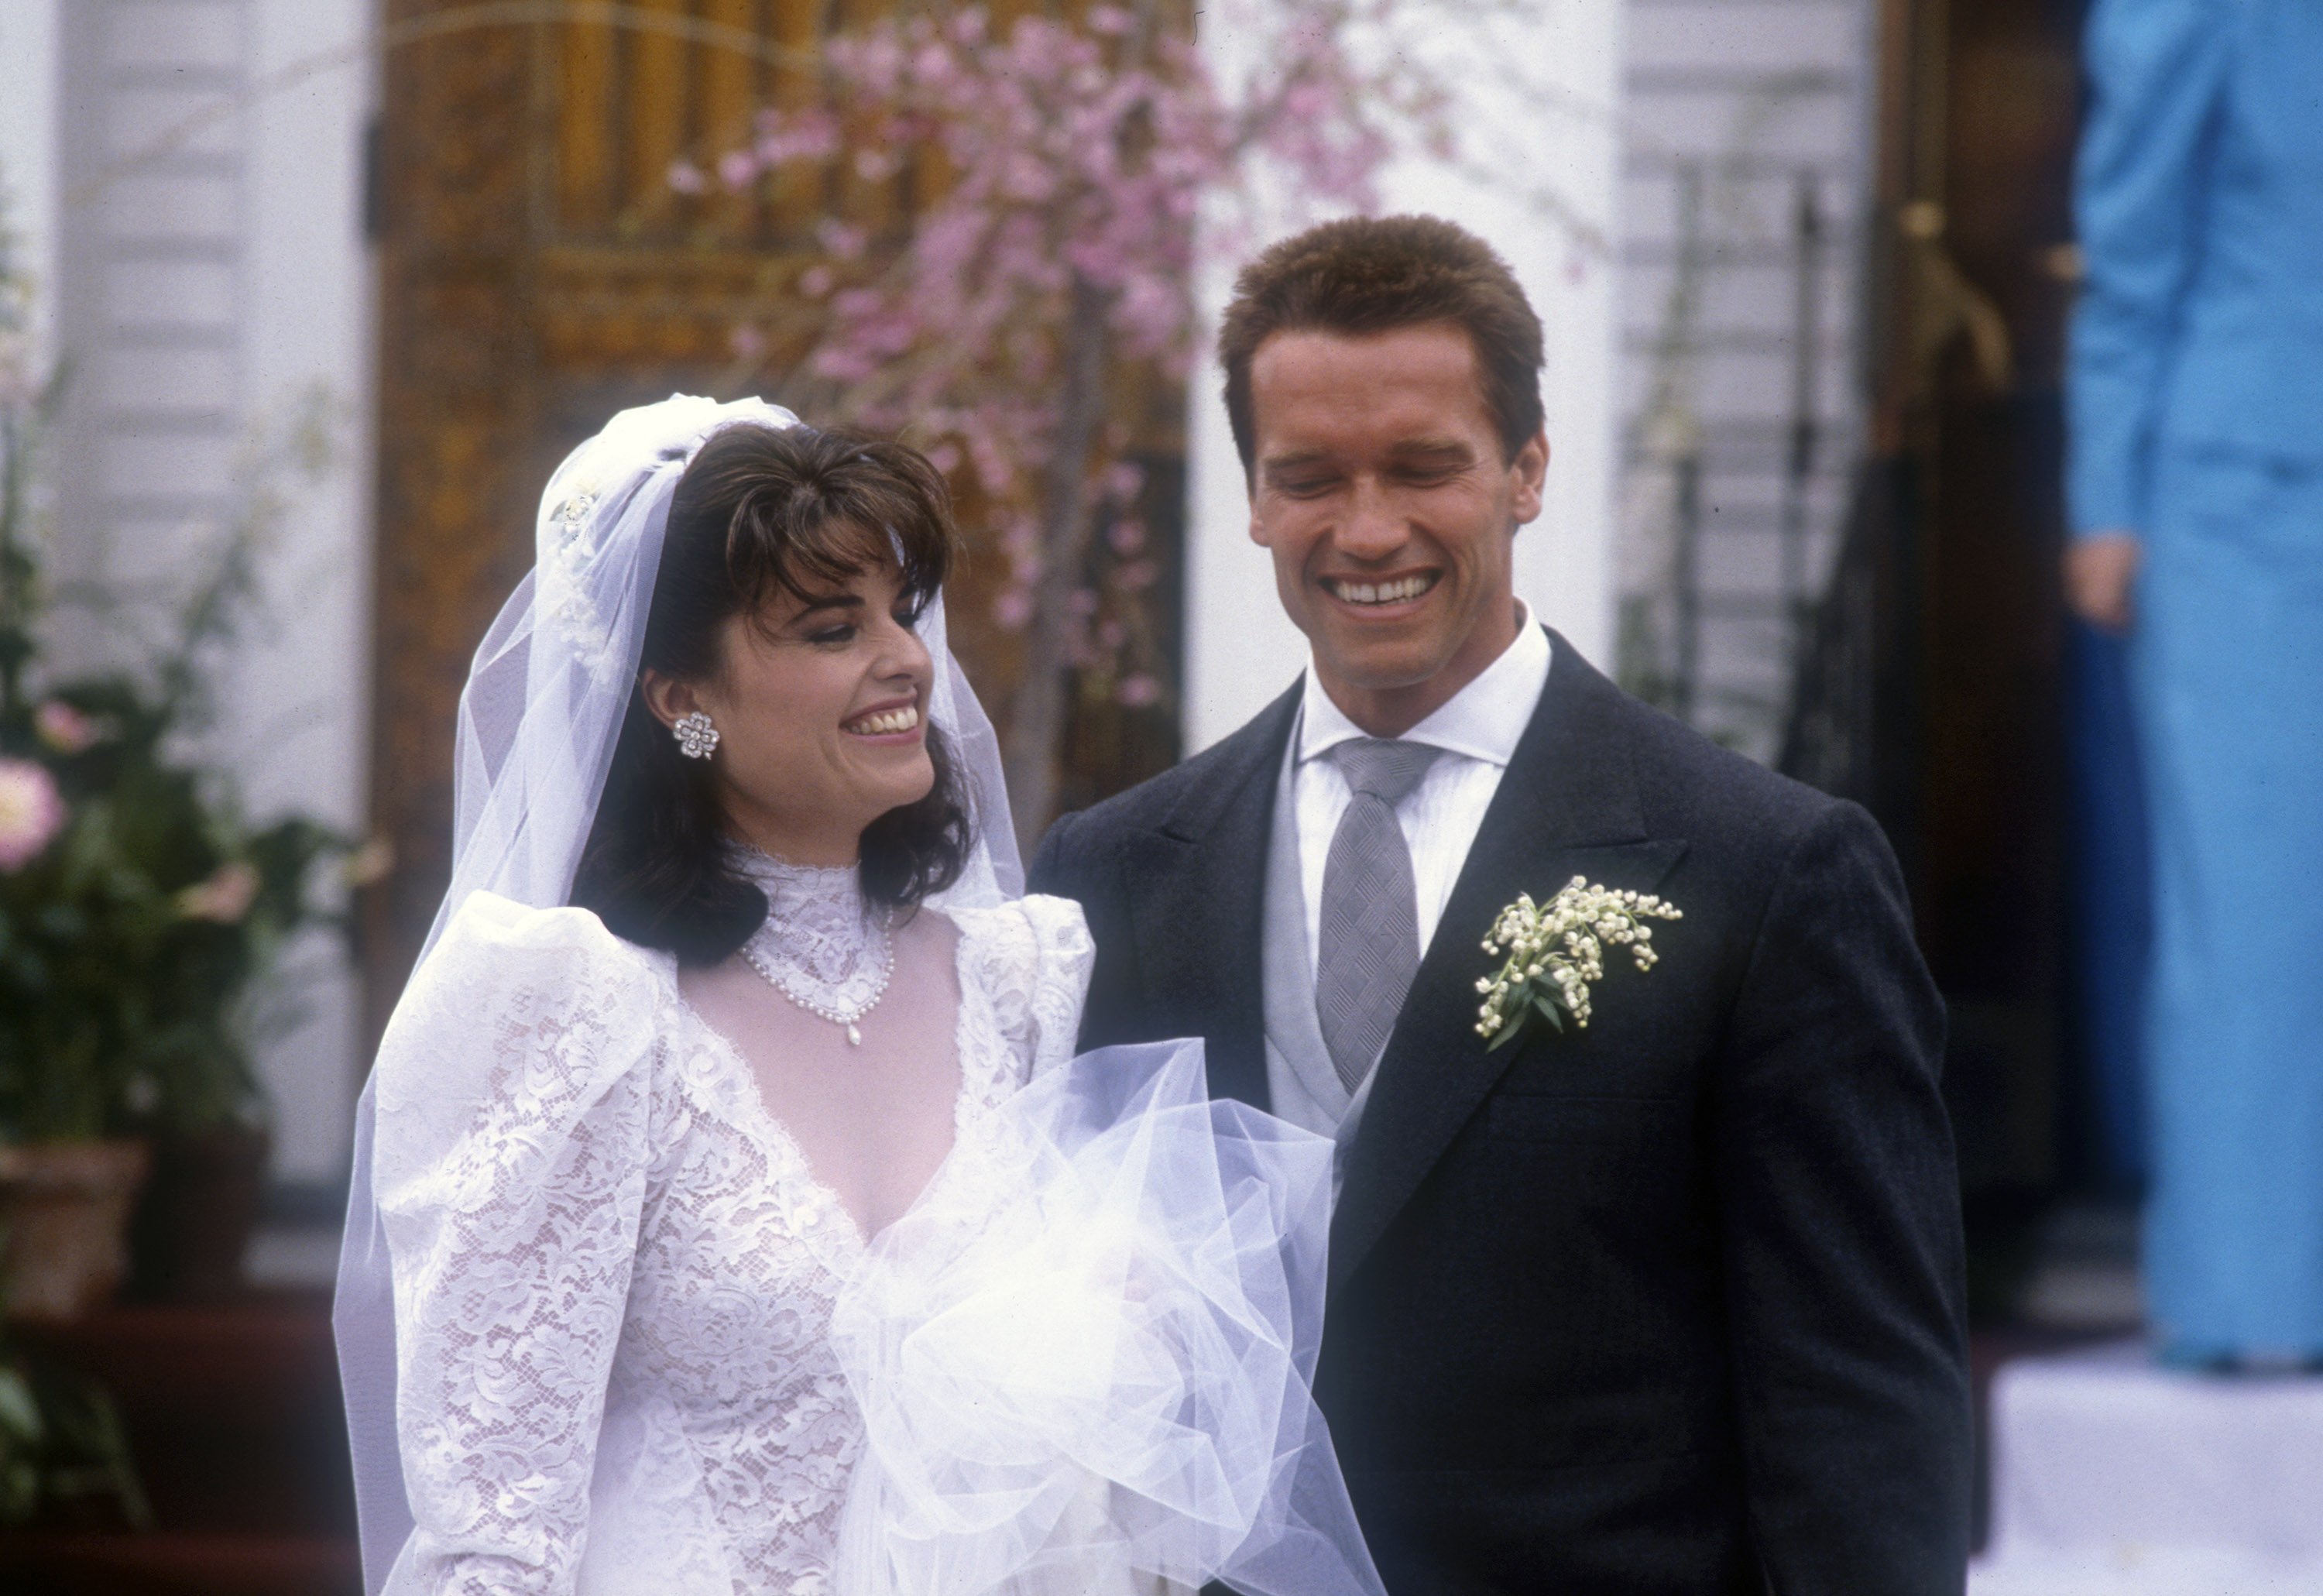 Actor Arnold Schwarzenegger with his new wife Maria Shriver outside St. Francis Xavier Church after their wedding on April 26, 1986. | Source: Getty Images 